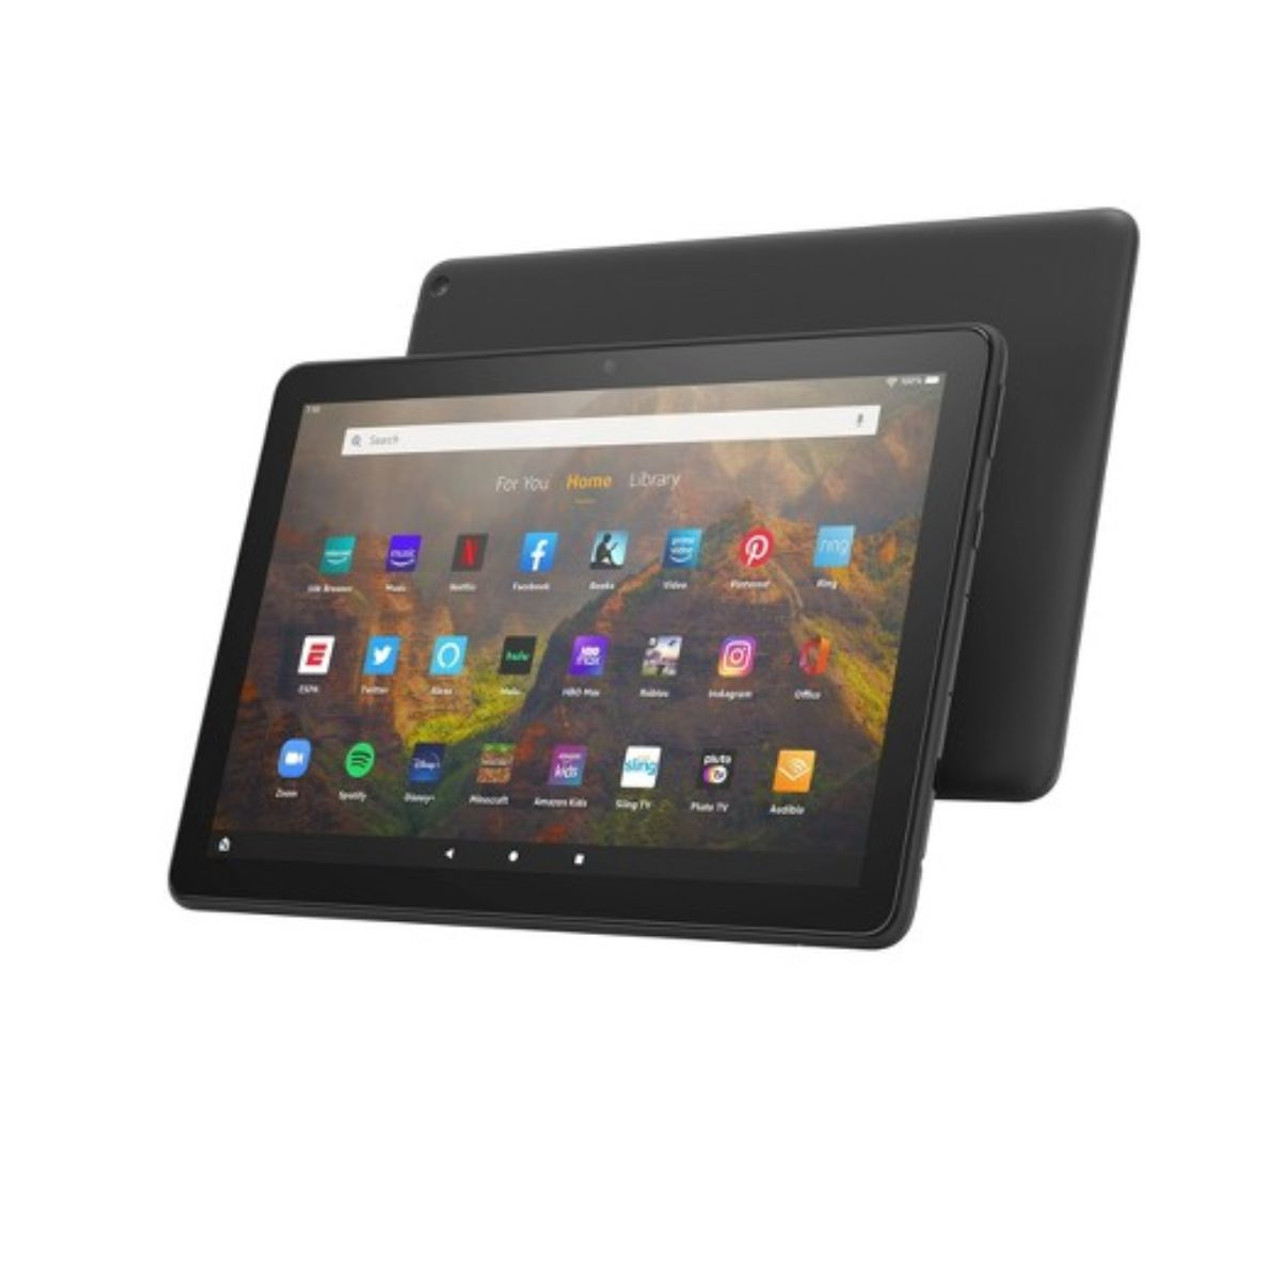 Fire HD 10 Tablet, 10.1", 1080p Full HD, 32 GB product image